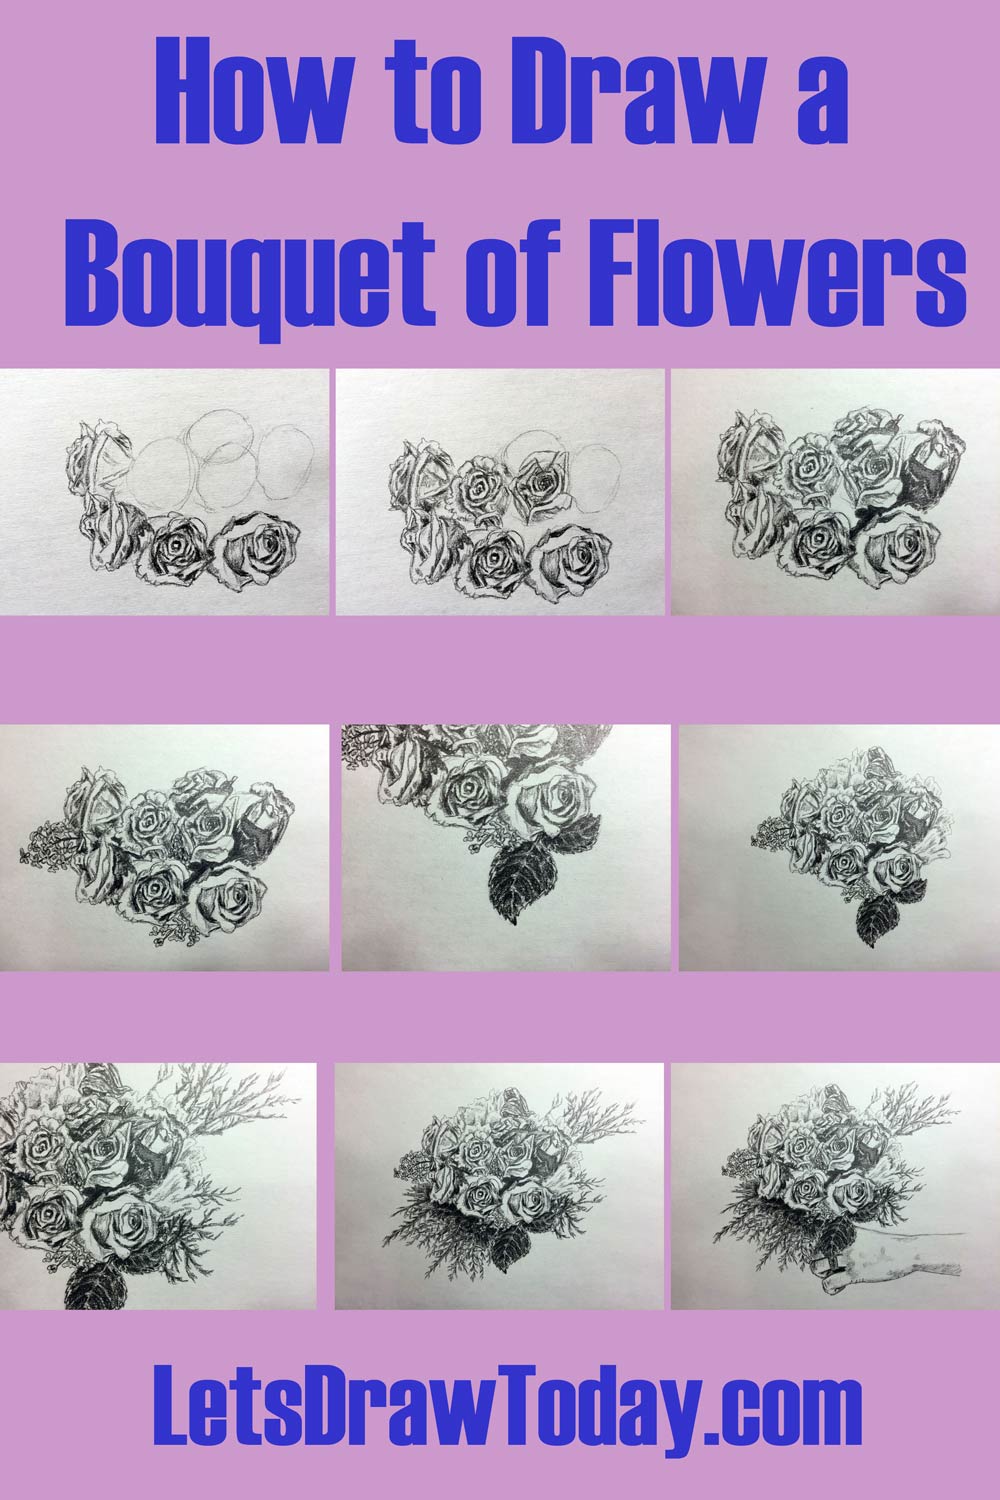 How to Draw a Bouquet of Flowers - Let's Draw Today